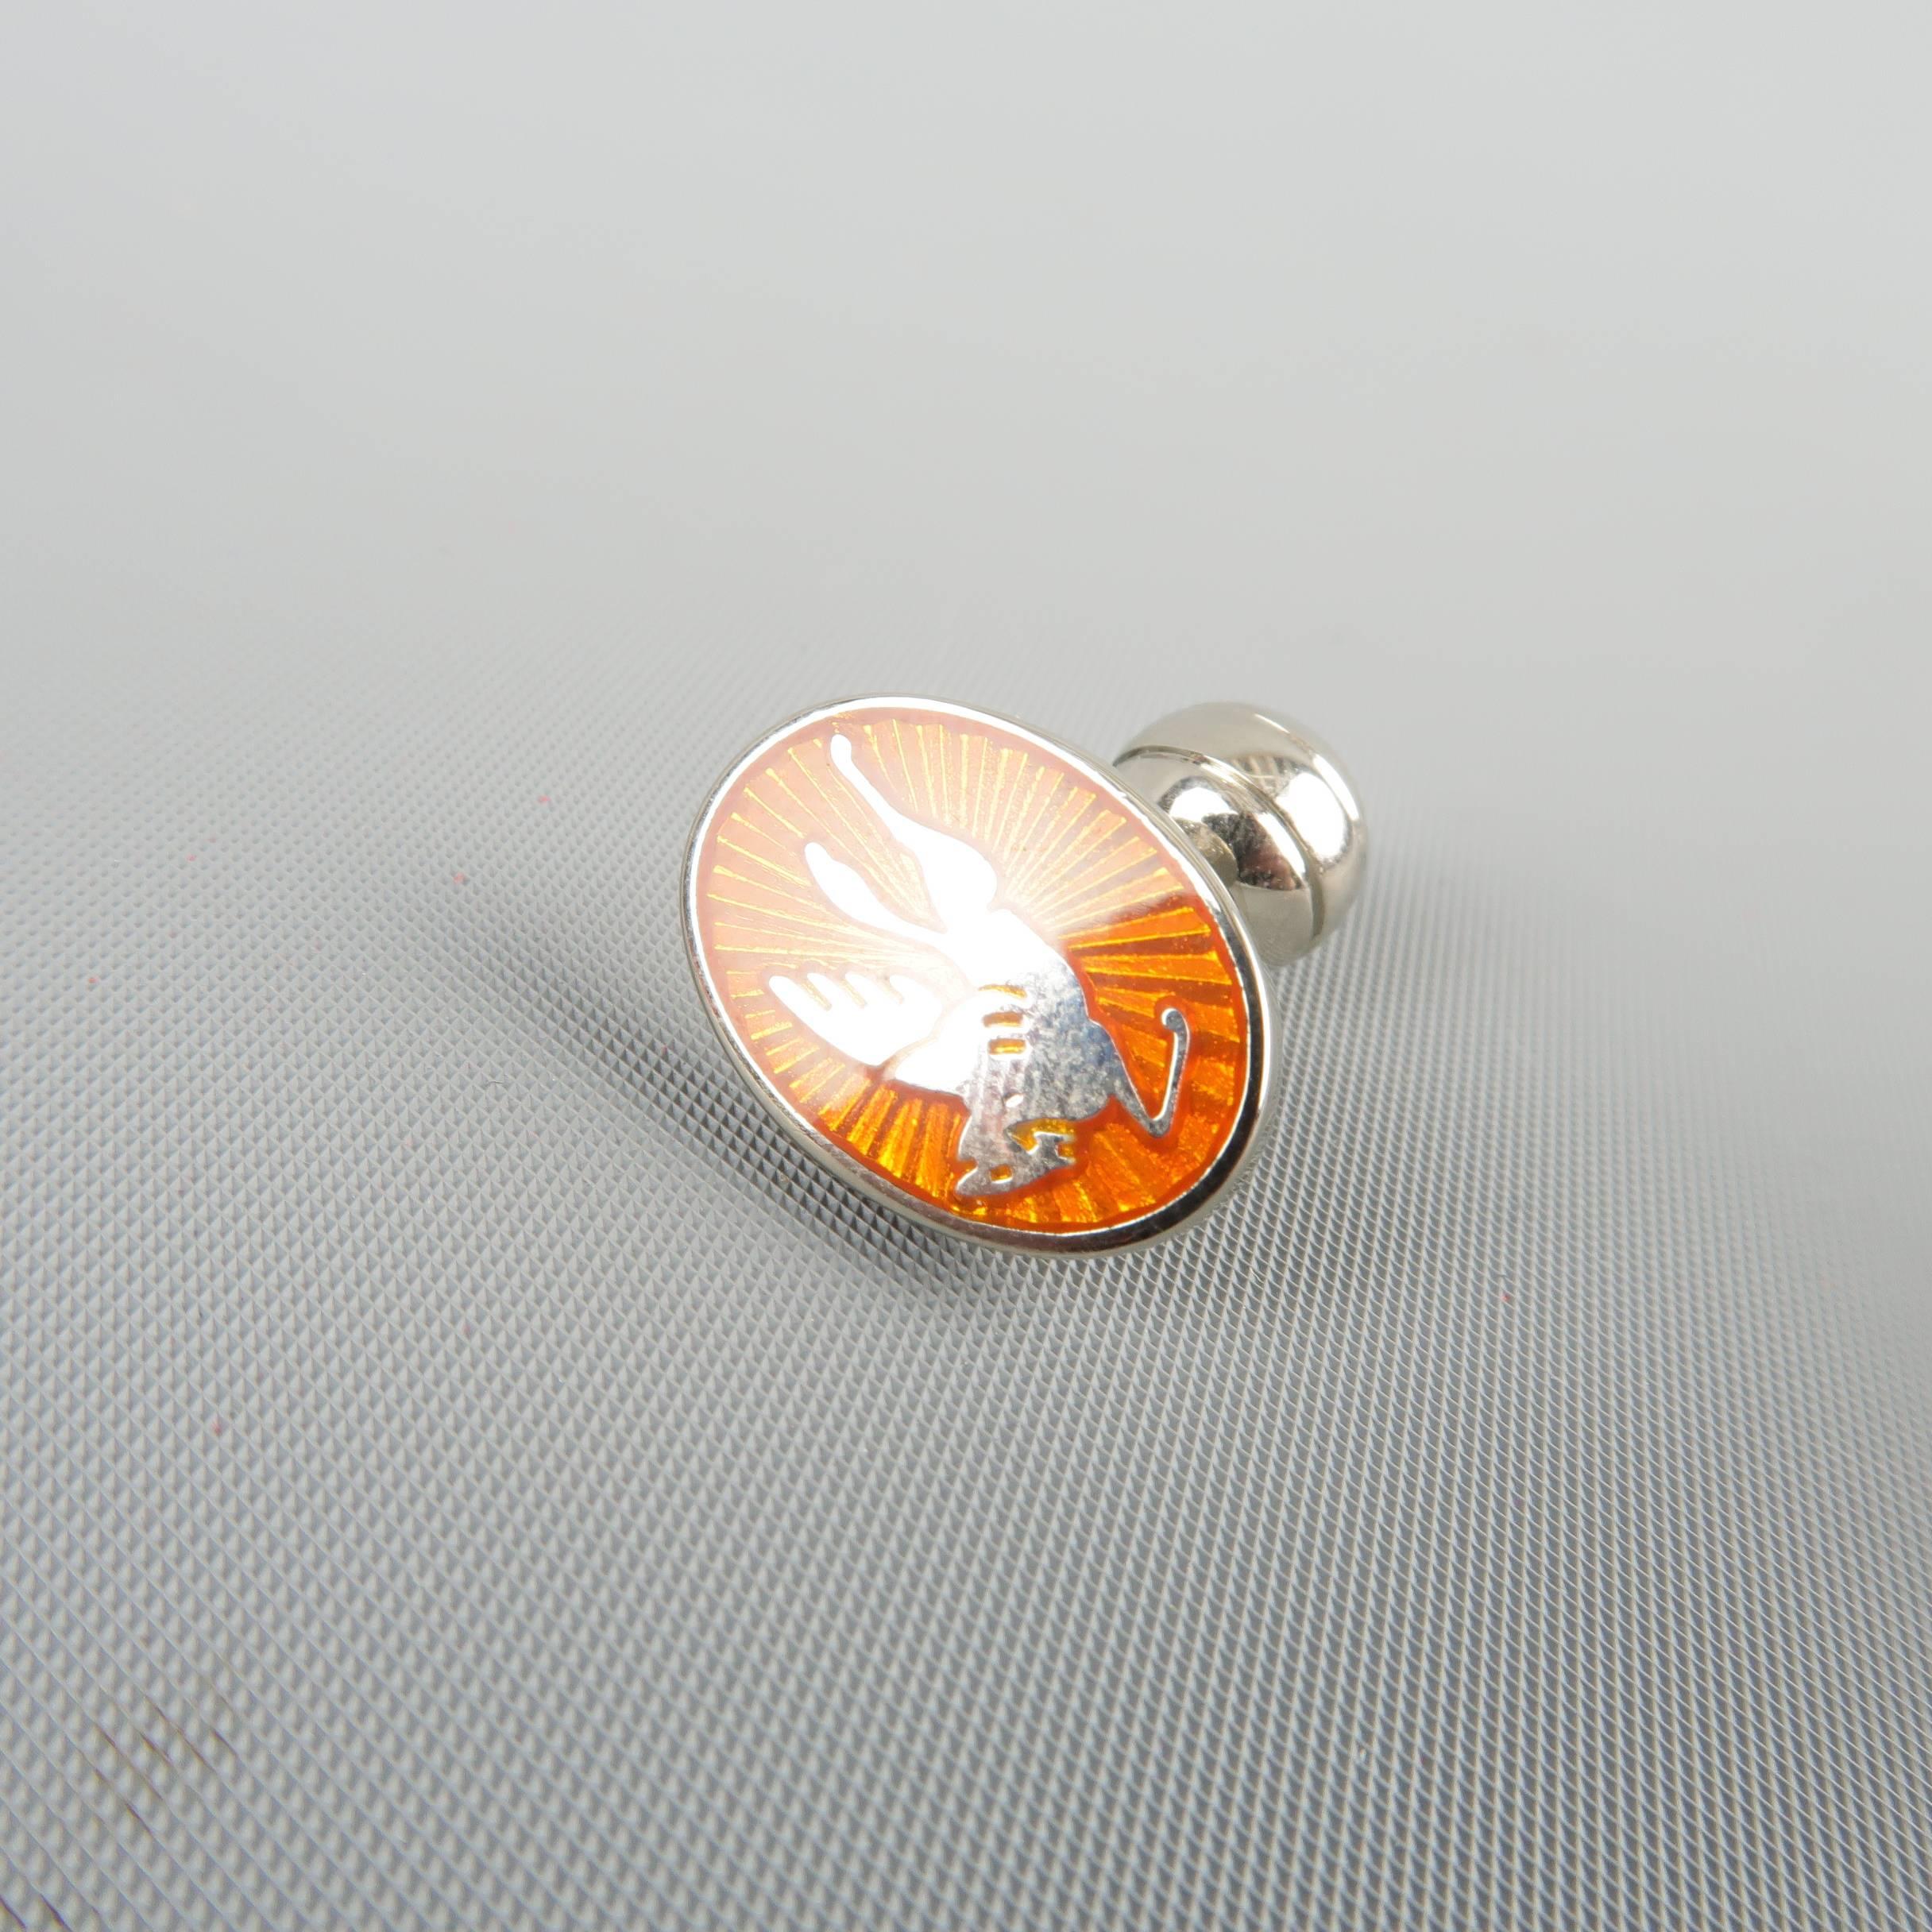 ETRO cuff links come in silver tone metal with an orange enamel pegasus motif and leather case.
 
Excellent Pre-Owned Condition.
